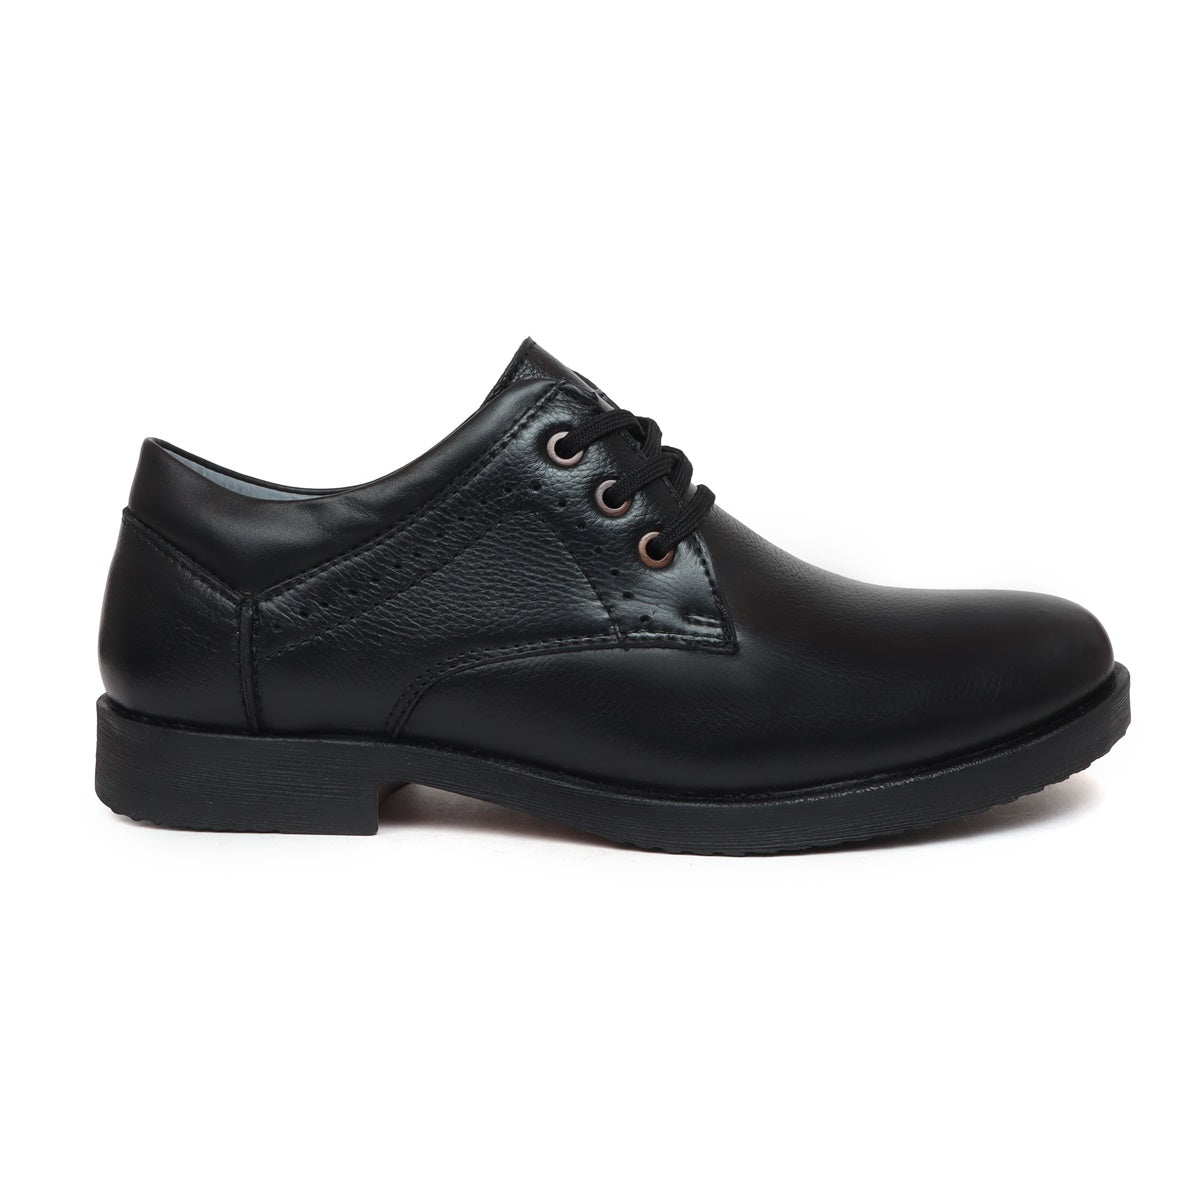 Classic Shoes for Men in Genuine Leather D – 3561